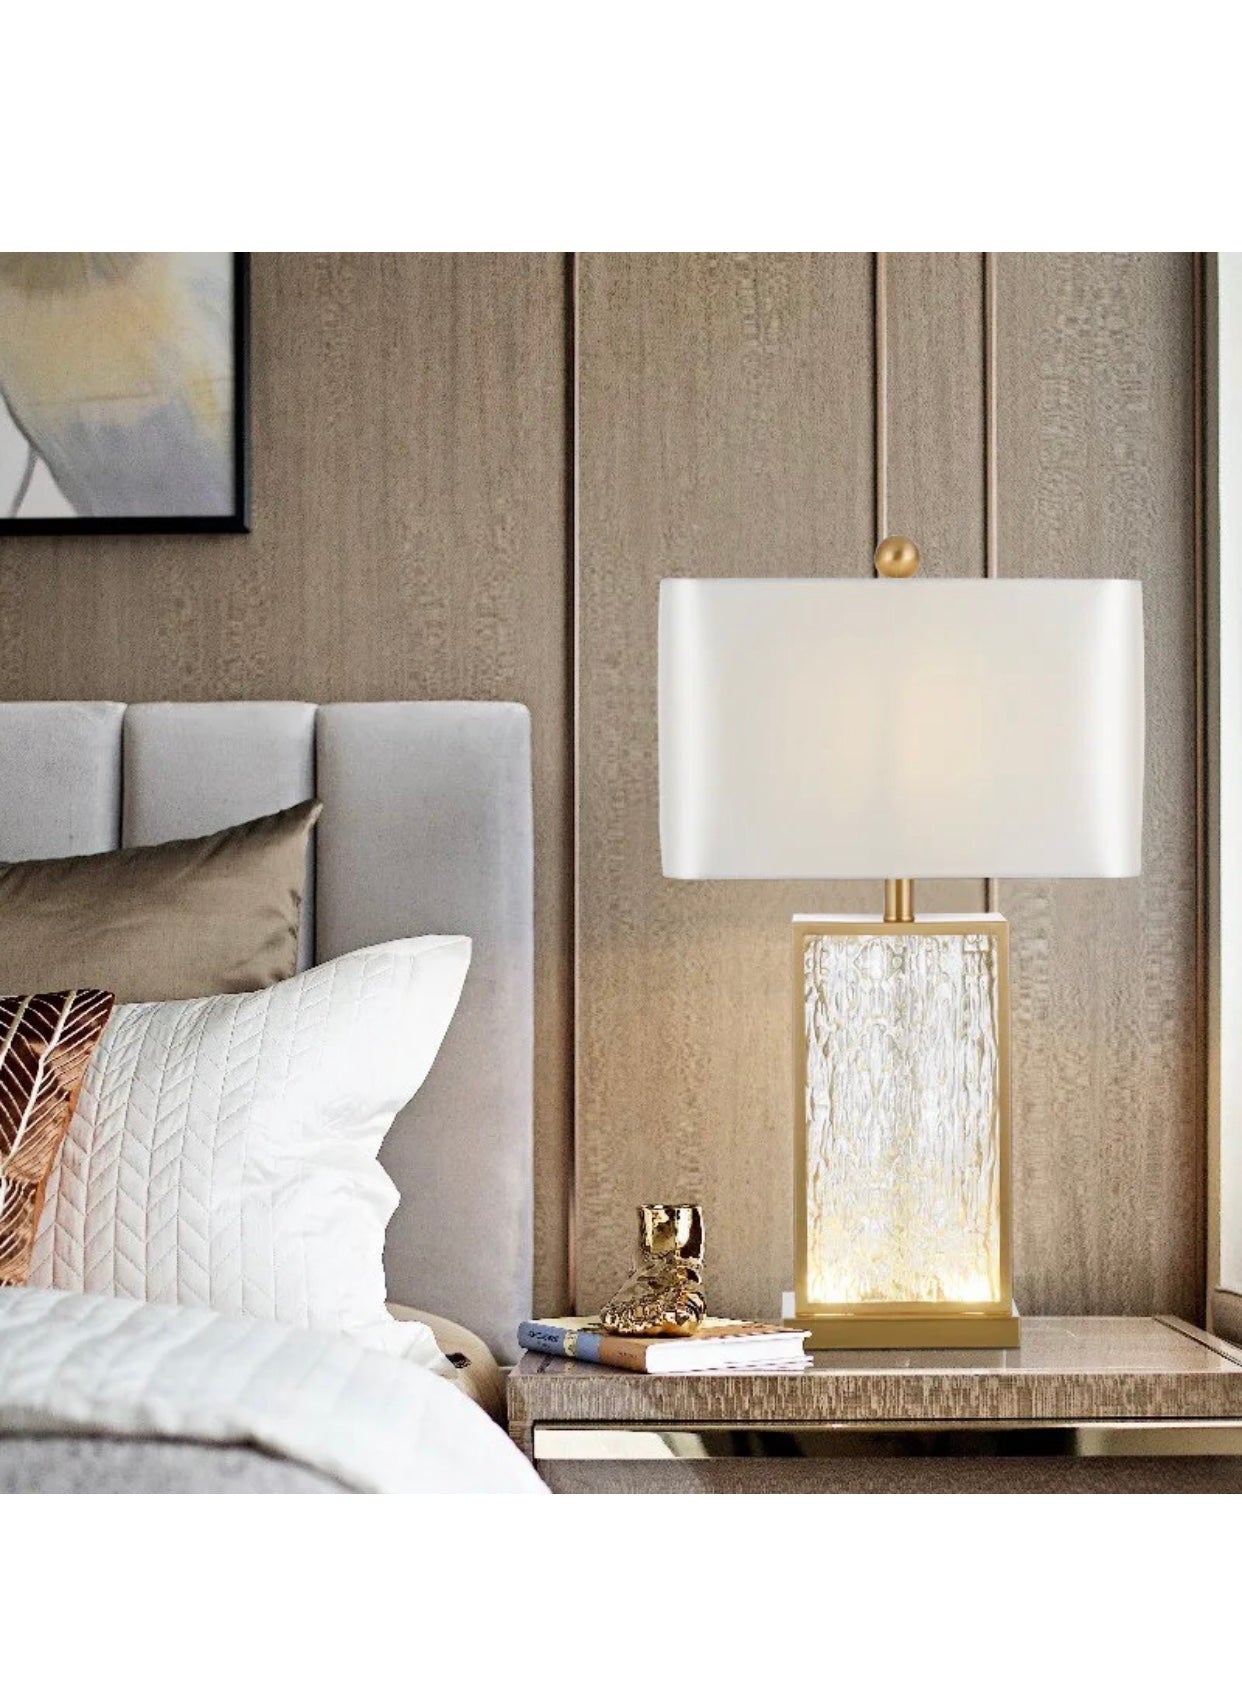 Lux glass metal table lamp